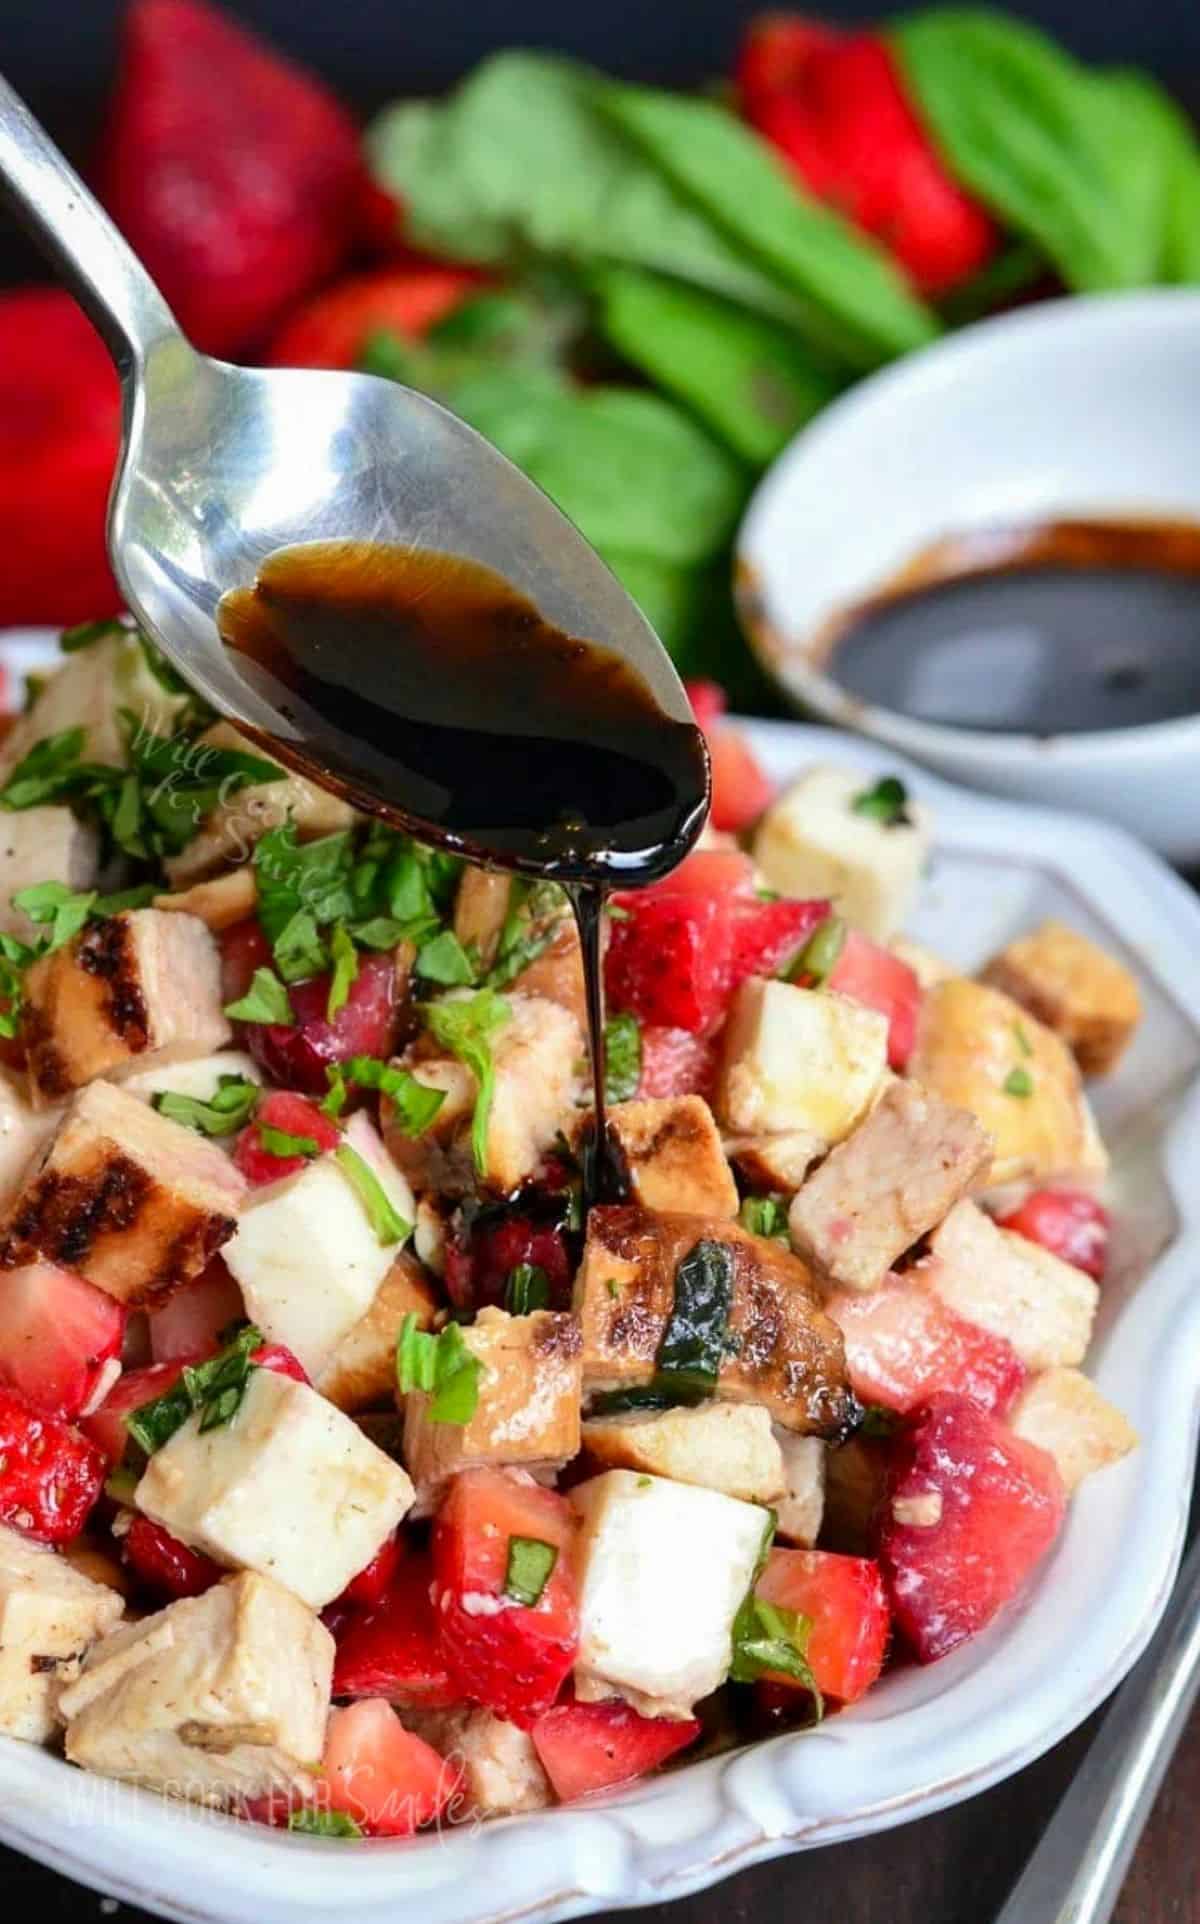 Balsamic reduction is being poured on top of a chicken strawberry salad.